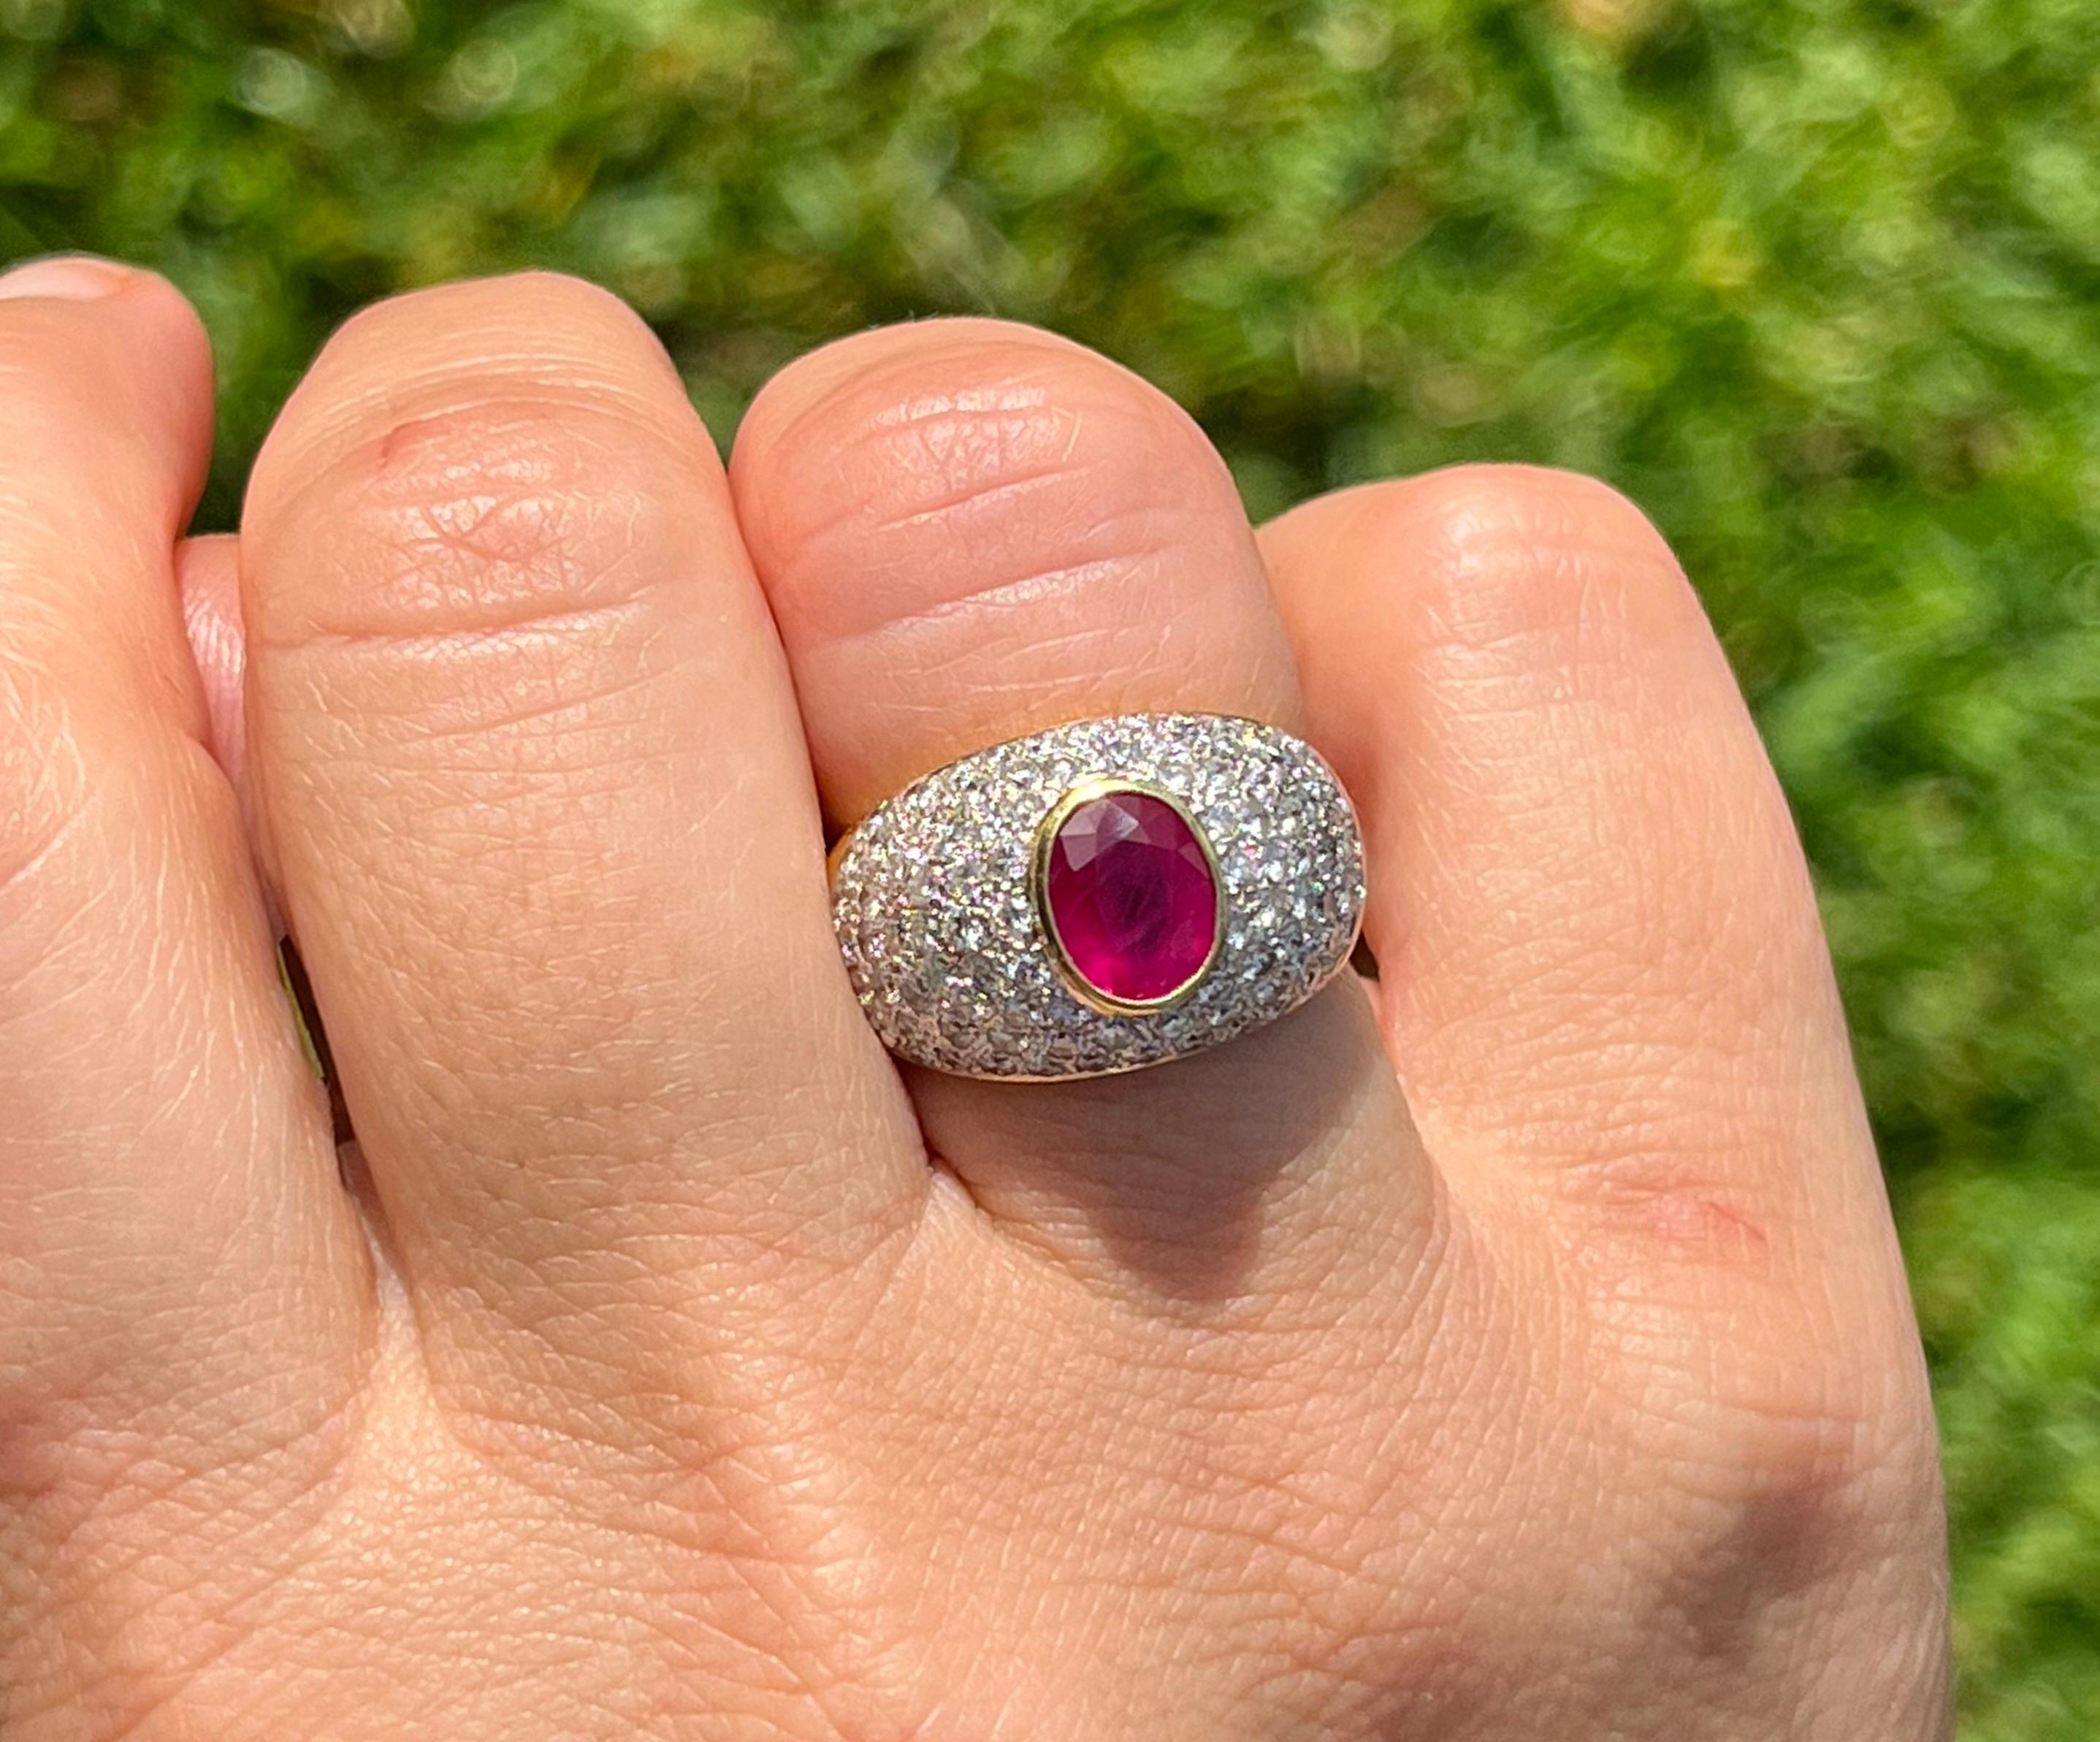 Red and robust, this natural Ruby ring is a classic cocktail ring with Art Deco inspirations. The Ruby is mounted in a secure bezel setting of 18-karat solid yellow gold with a double rhodium-plated white gold overtone where the diamonds set.